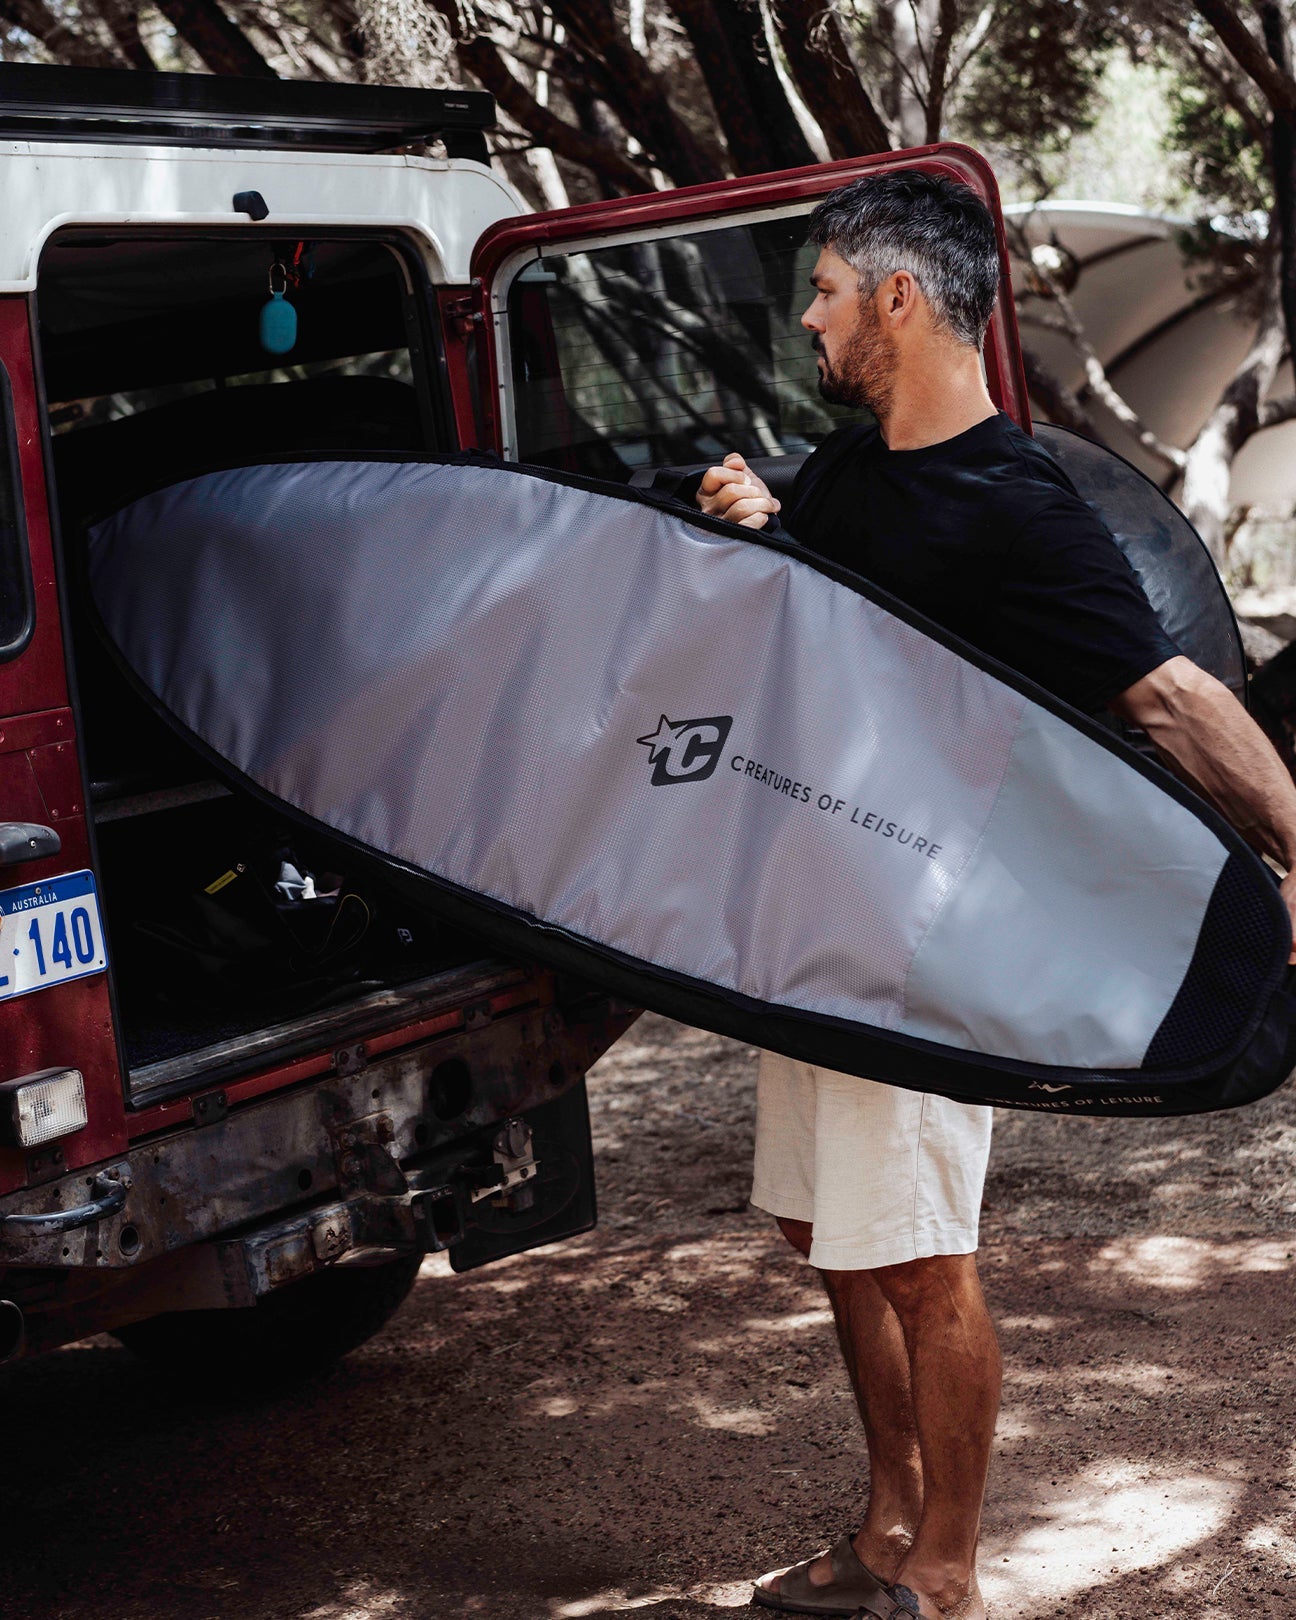 SHORTBOARD DAY USE COVER DT2.0